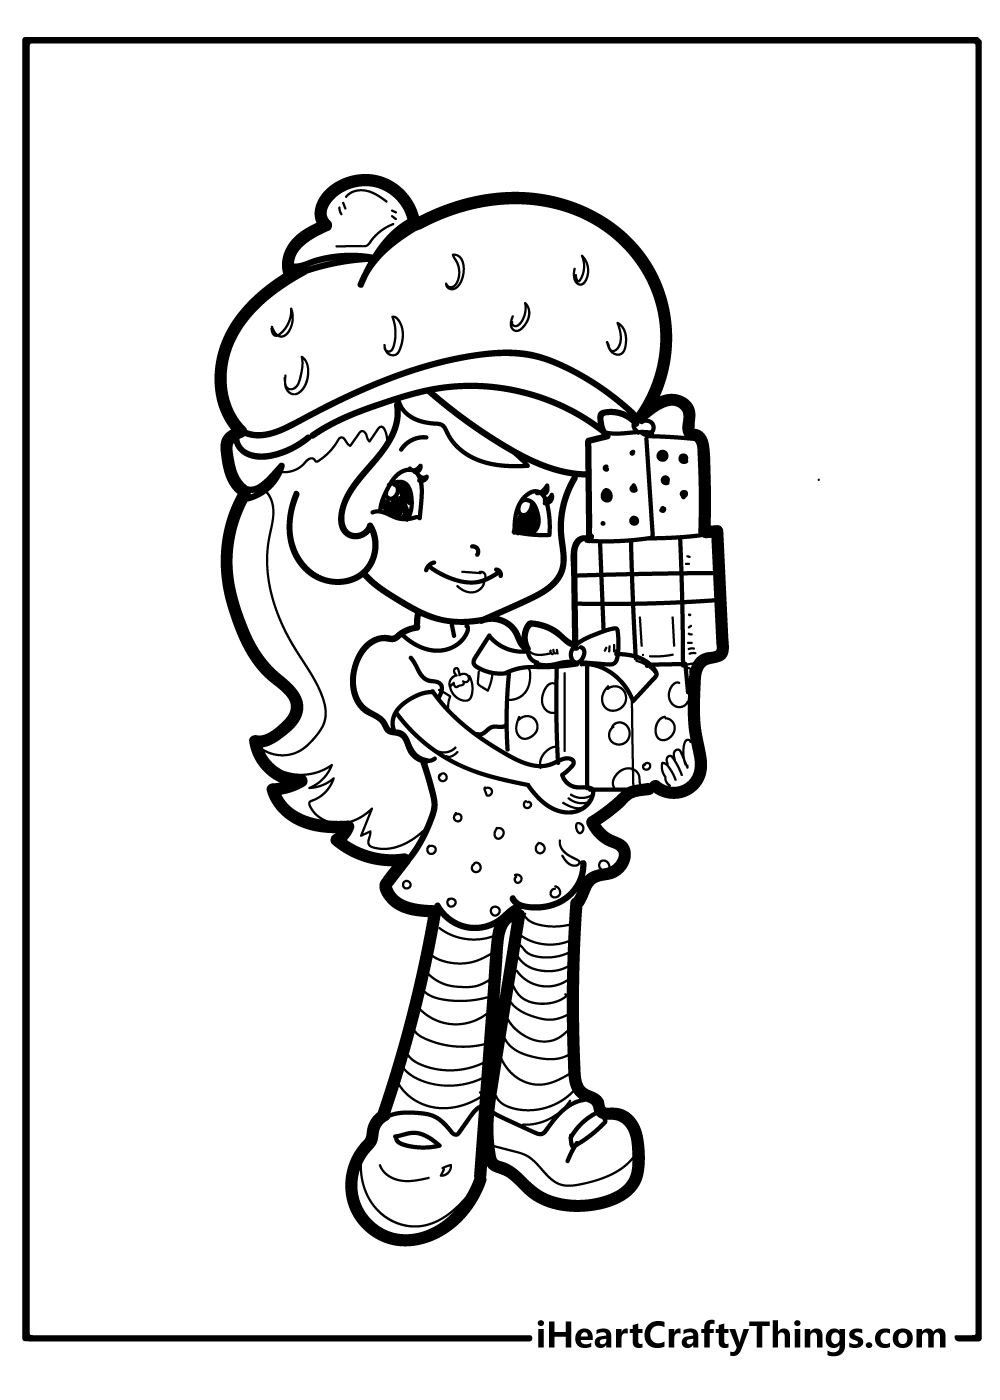 Strawberry Shortcake Coloring Pages for preschoolers free printable